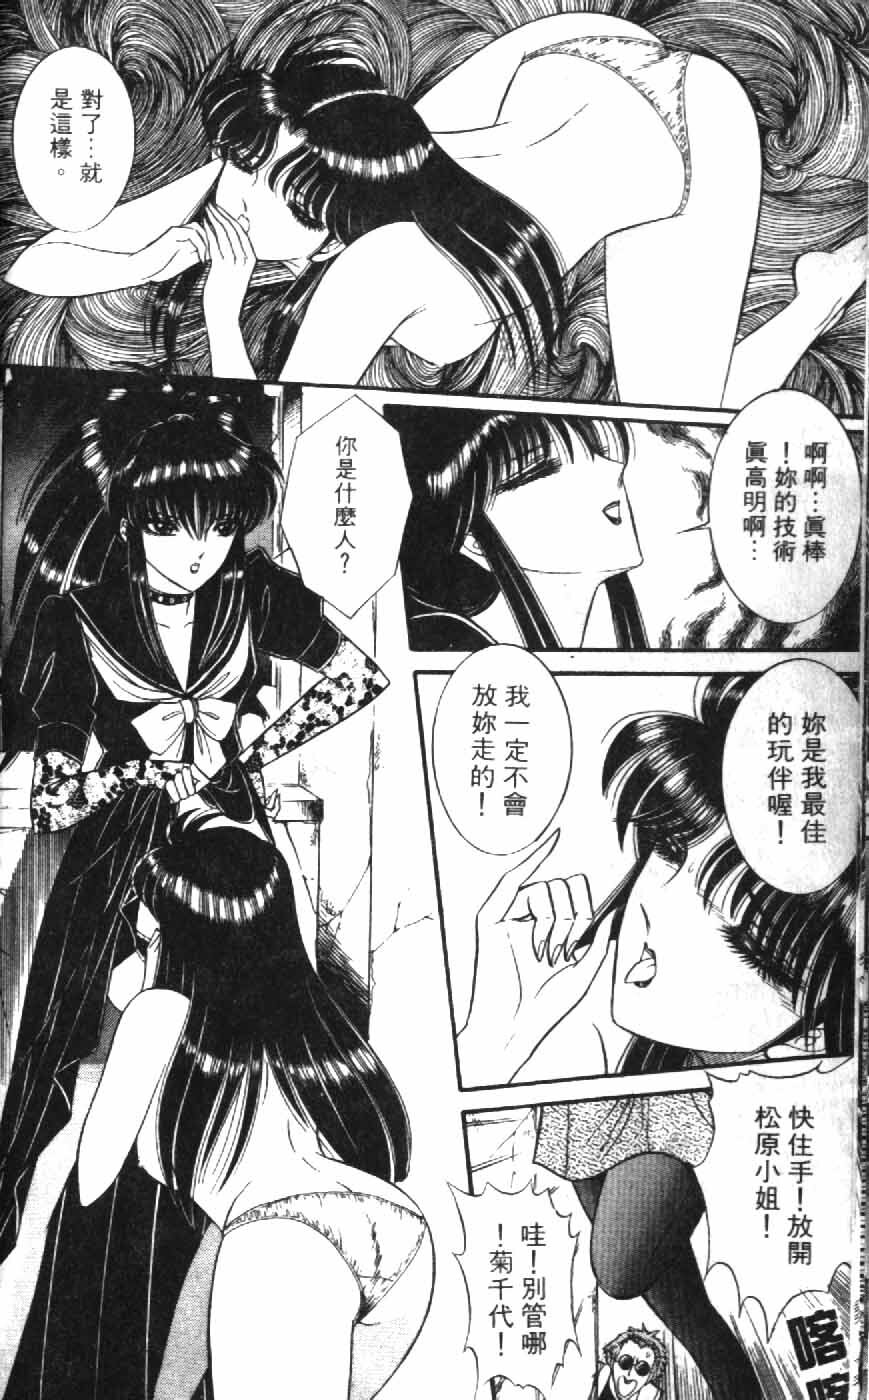 [Senno Knife] Ouma ga Horror Show 1 - Trans Sexual Special Show 1 | 顫慄博覽會 1 [Chinese] page 35 full